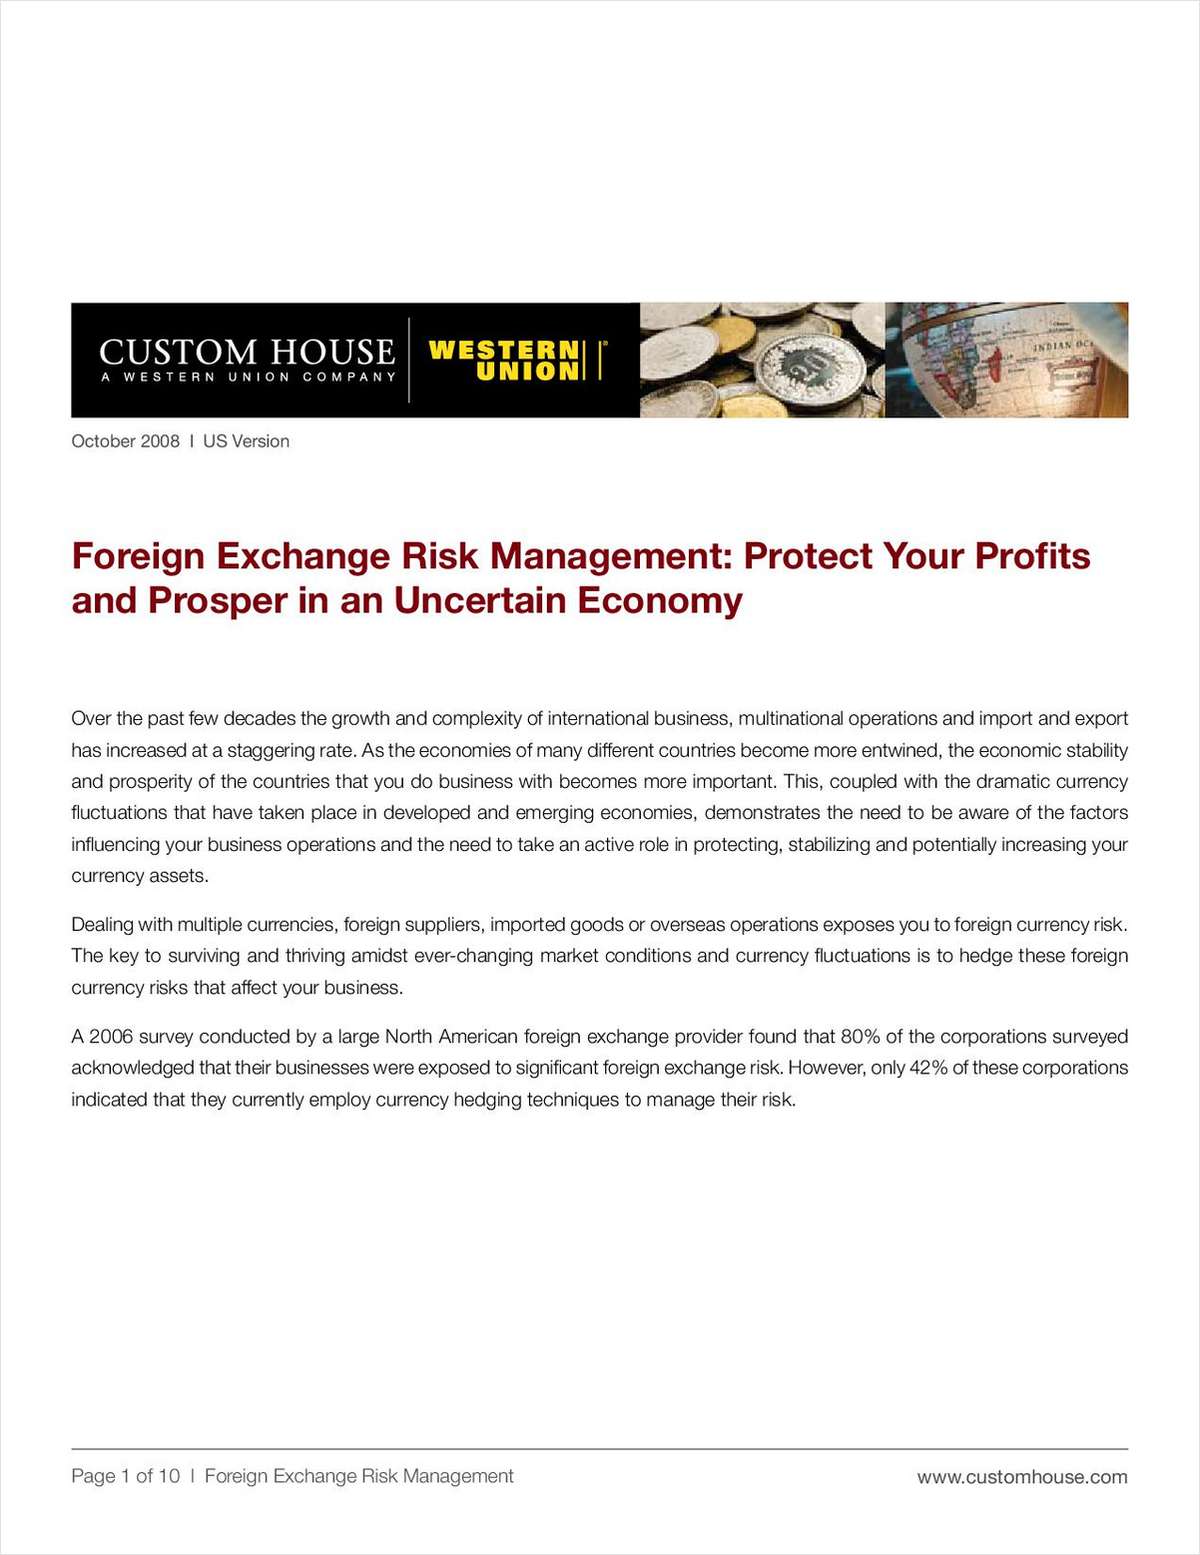 Hedge Your Currency Risks – Foreign Exchange Risk Management